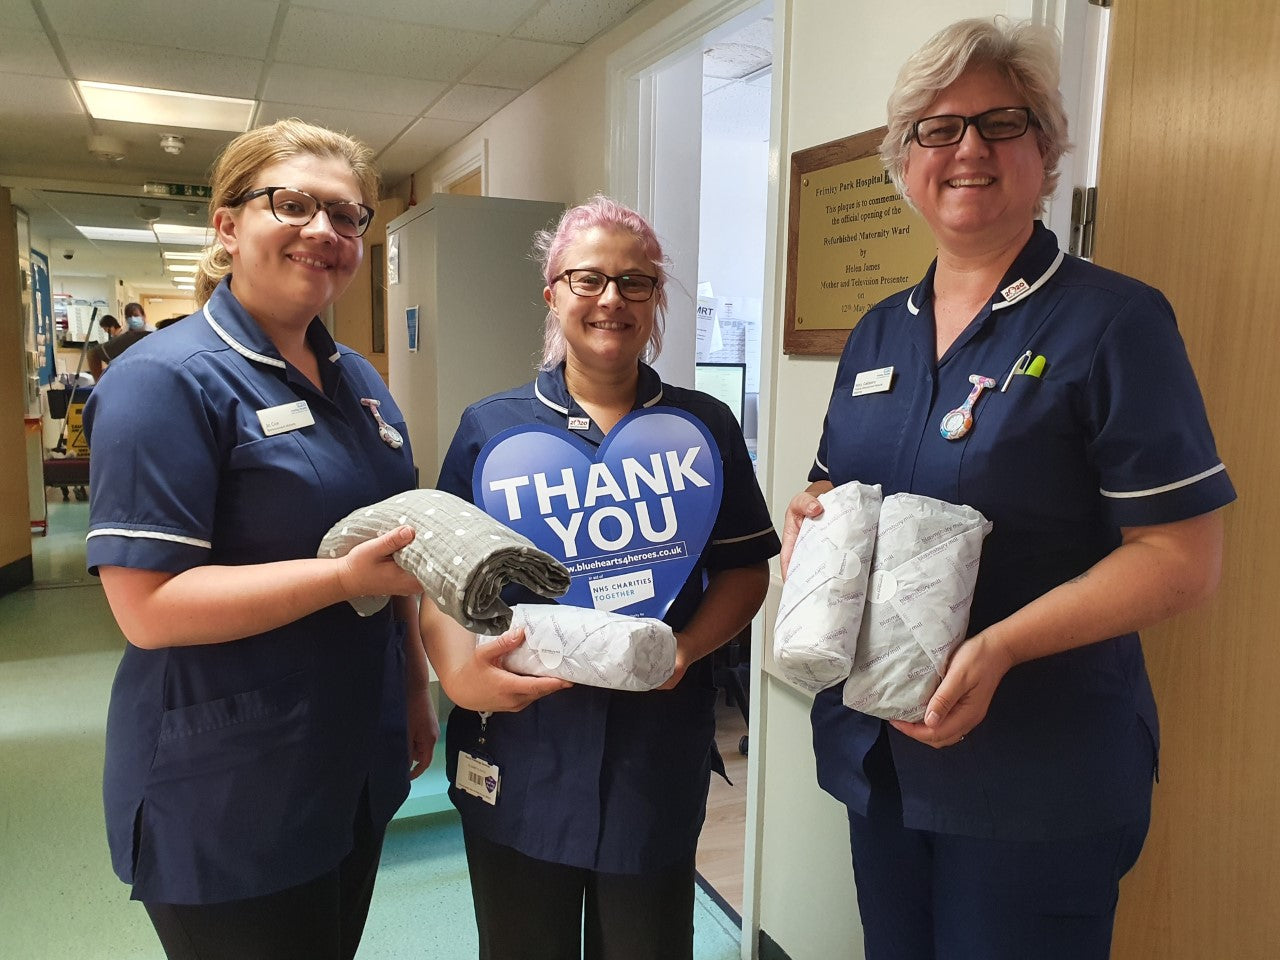 Swaddle surprise for new Mums at Frimley Park Hospital